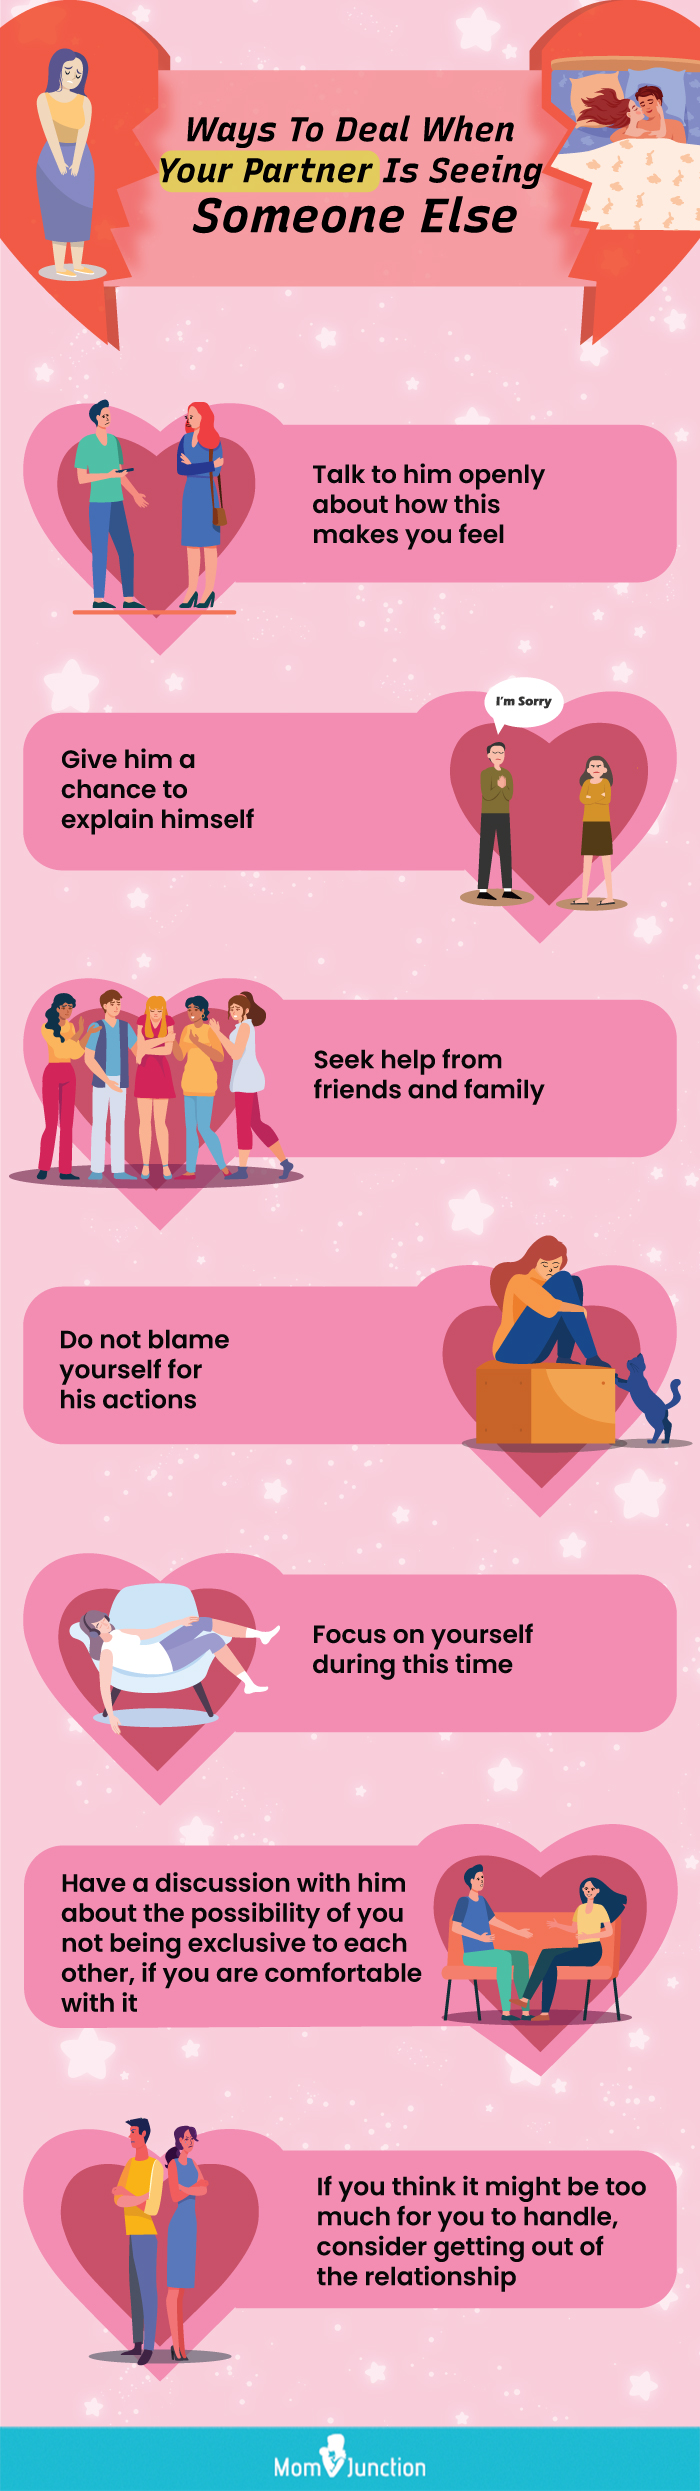 ways to deal when he is seeing someone else [infographic]